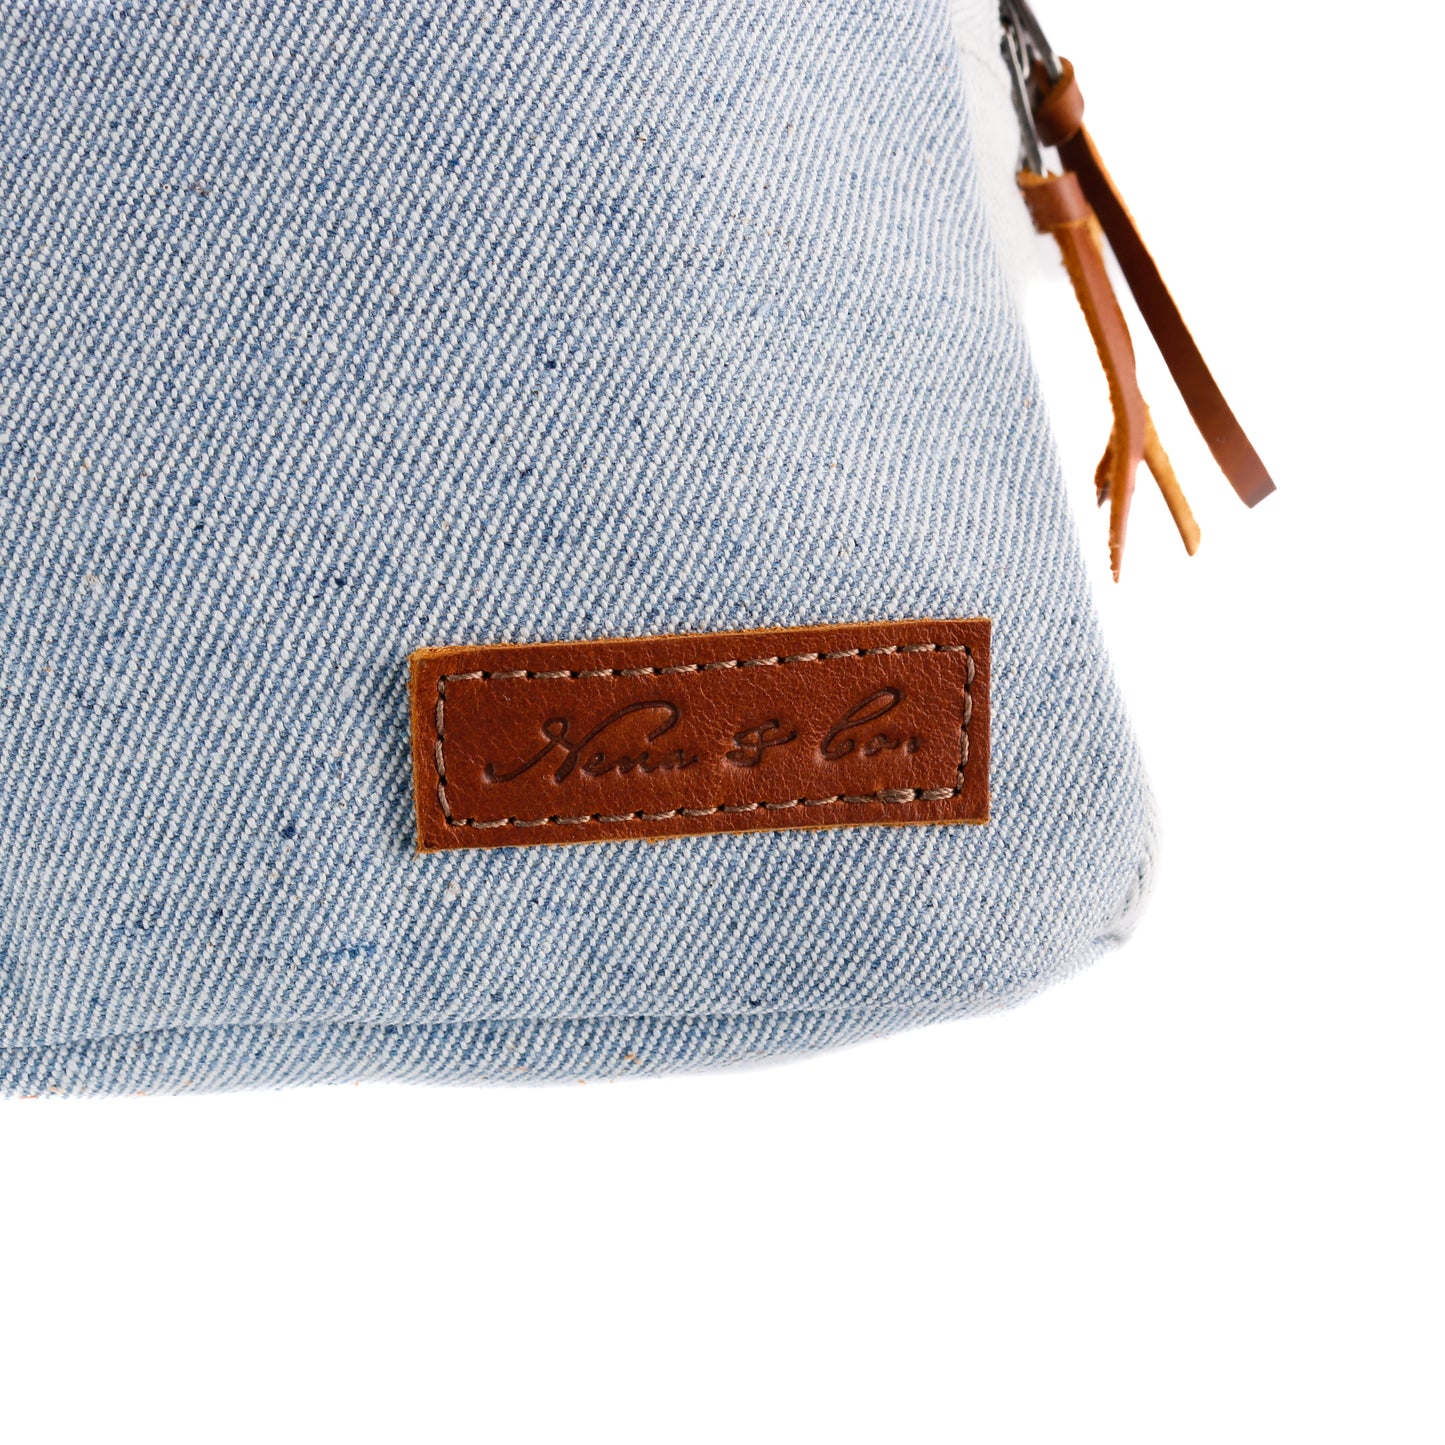 CROSSBODY SLING 2.0 - UPCYCLED DENIM WITH PATCH - CAFE - NO. 11345